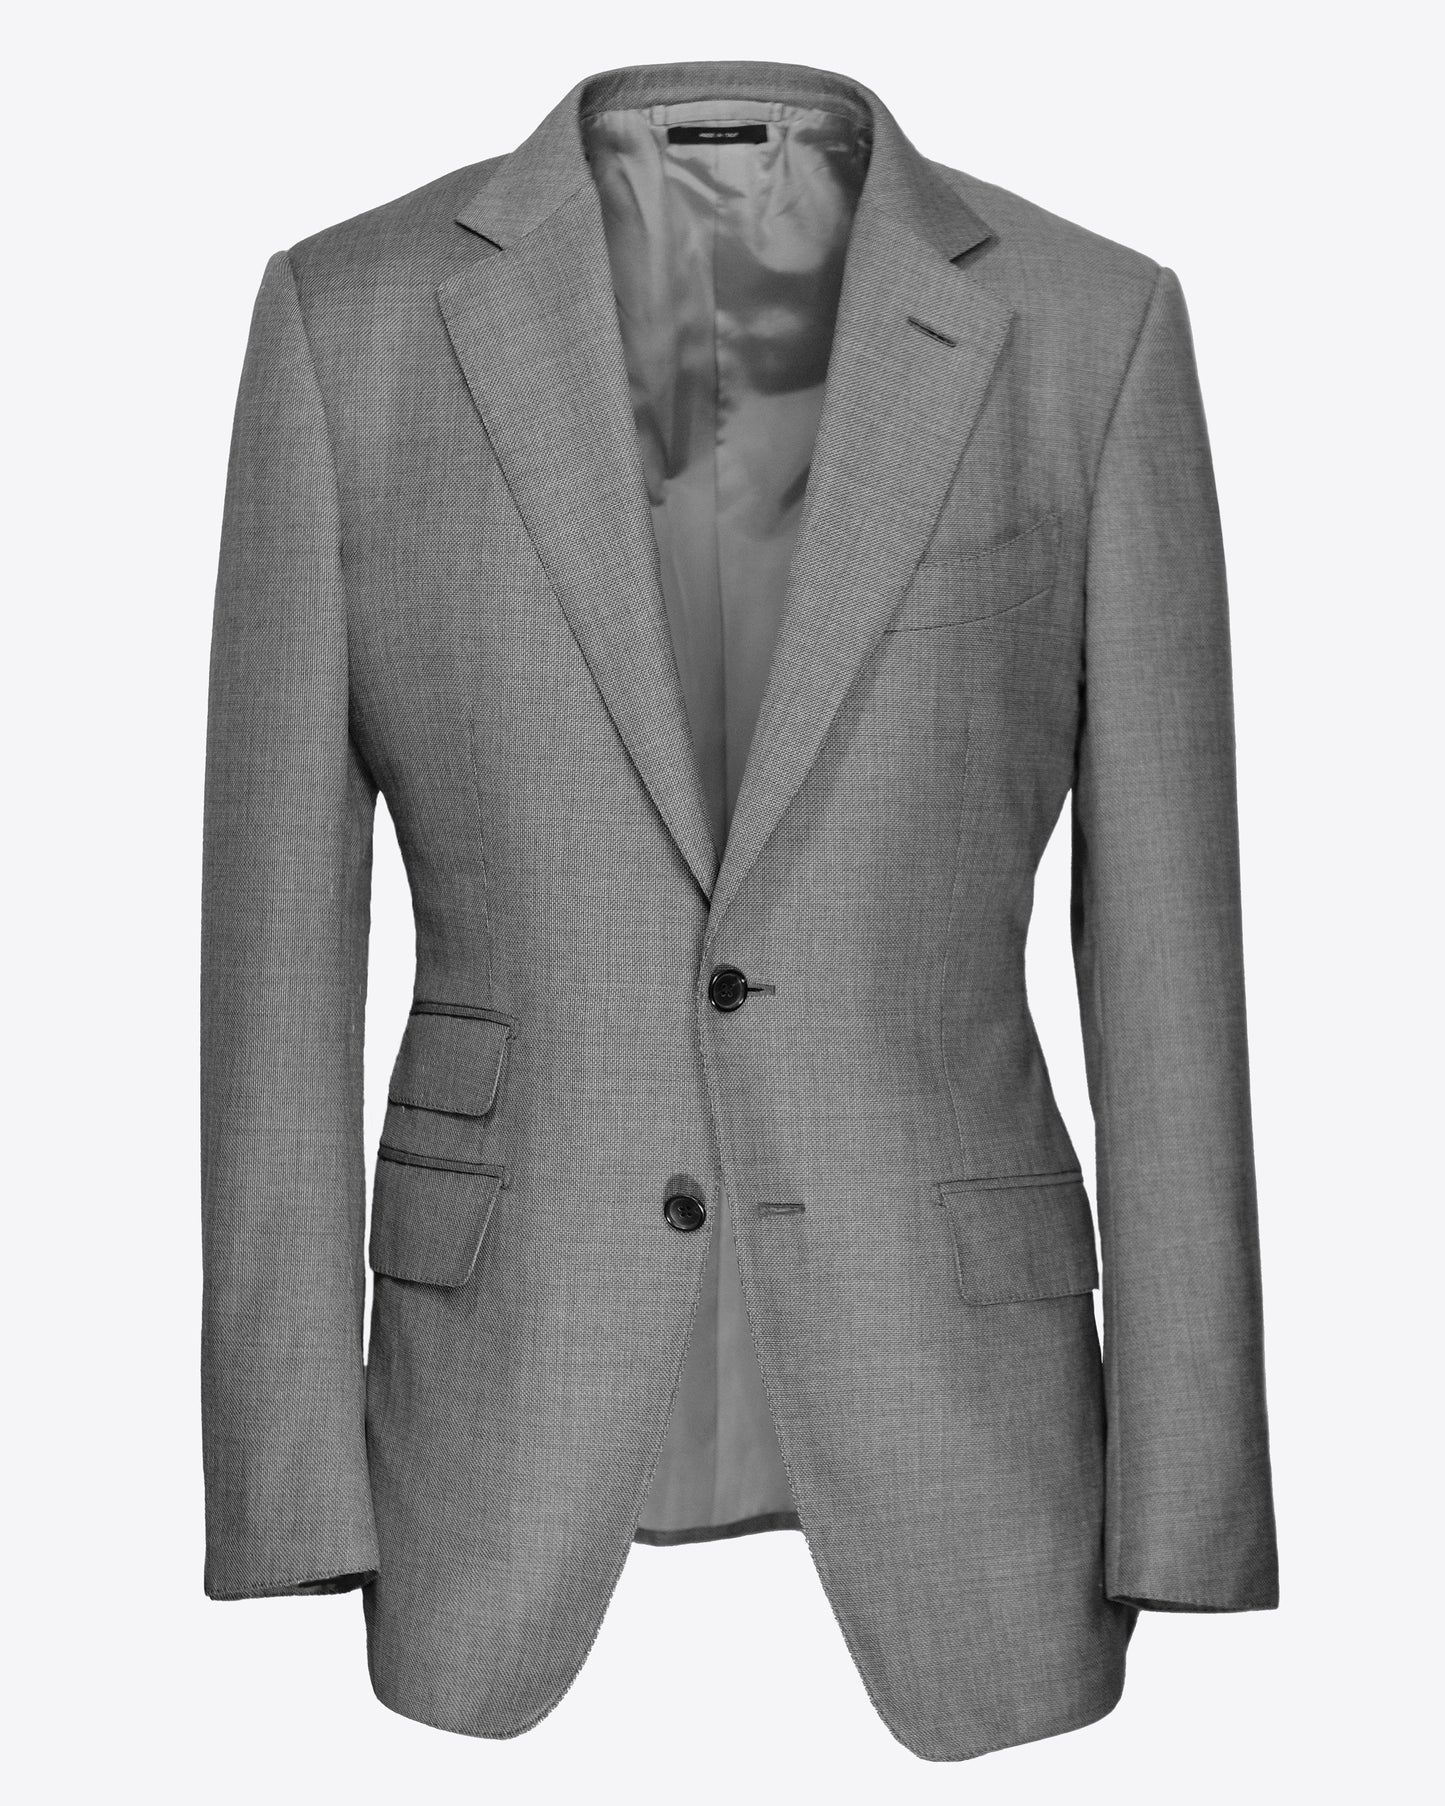 Tom Ford - Wool Suit Jacket, EU 48R – Archaic Archive